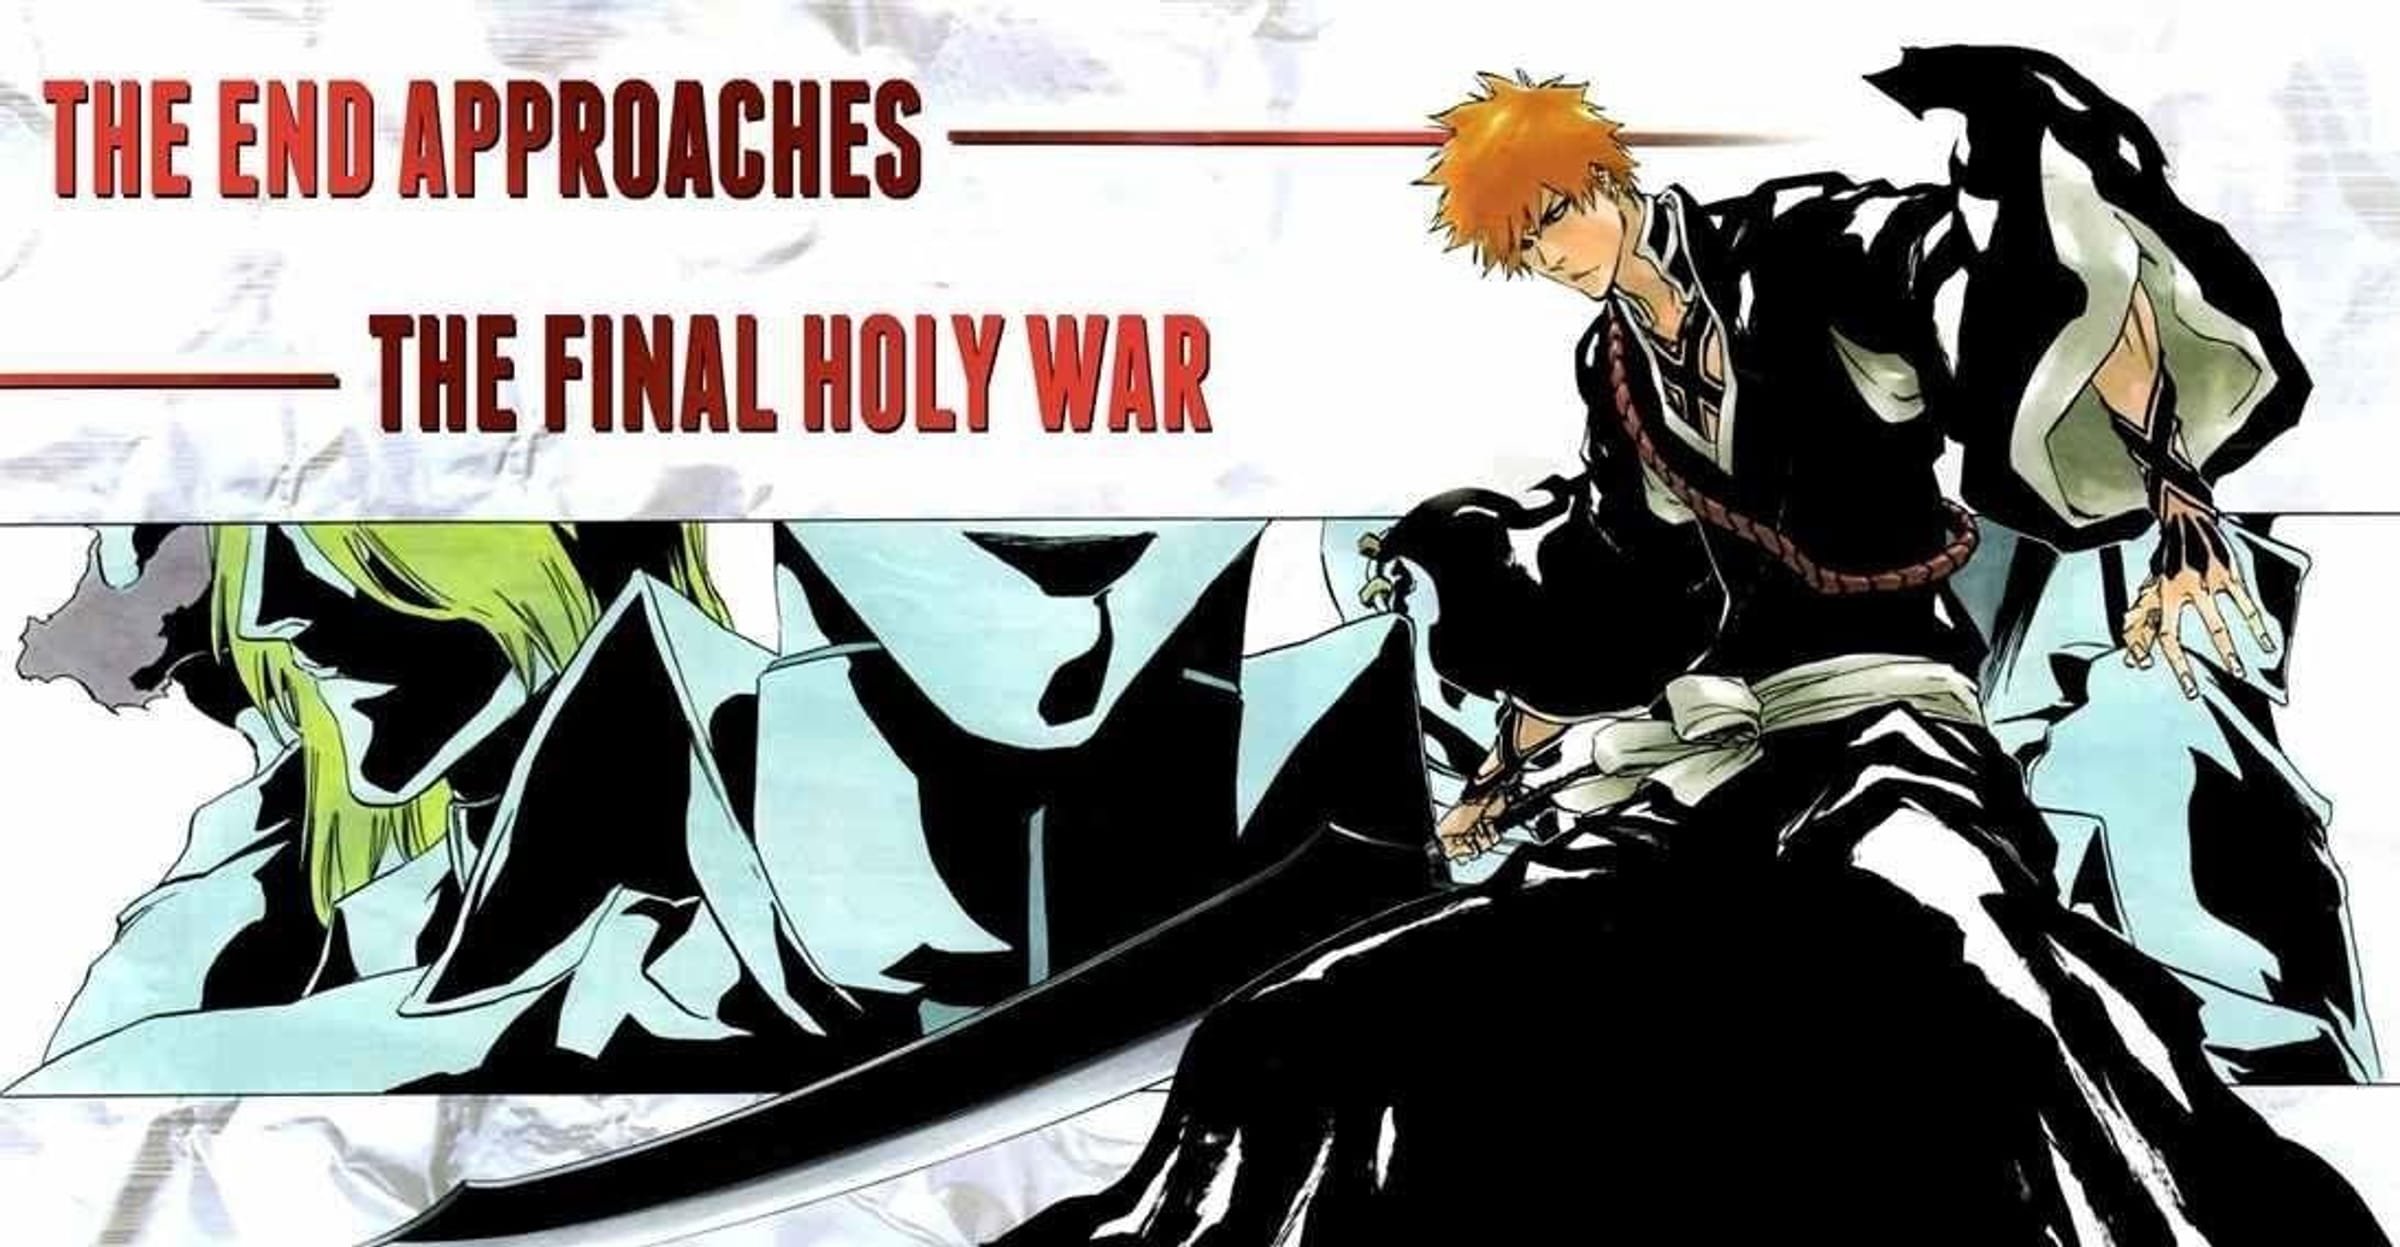 Bleach's Manga Is Far Better Than the Anime - Here's Why